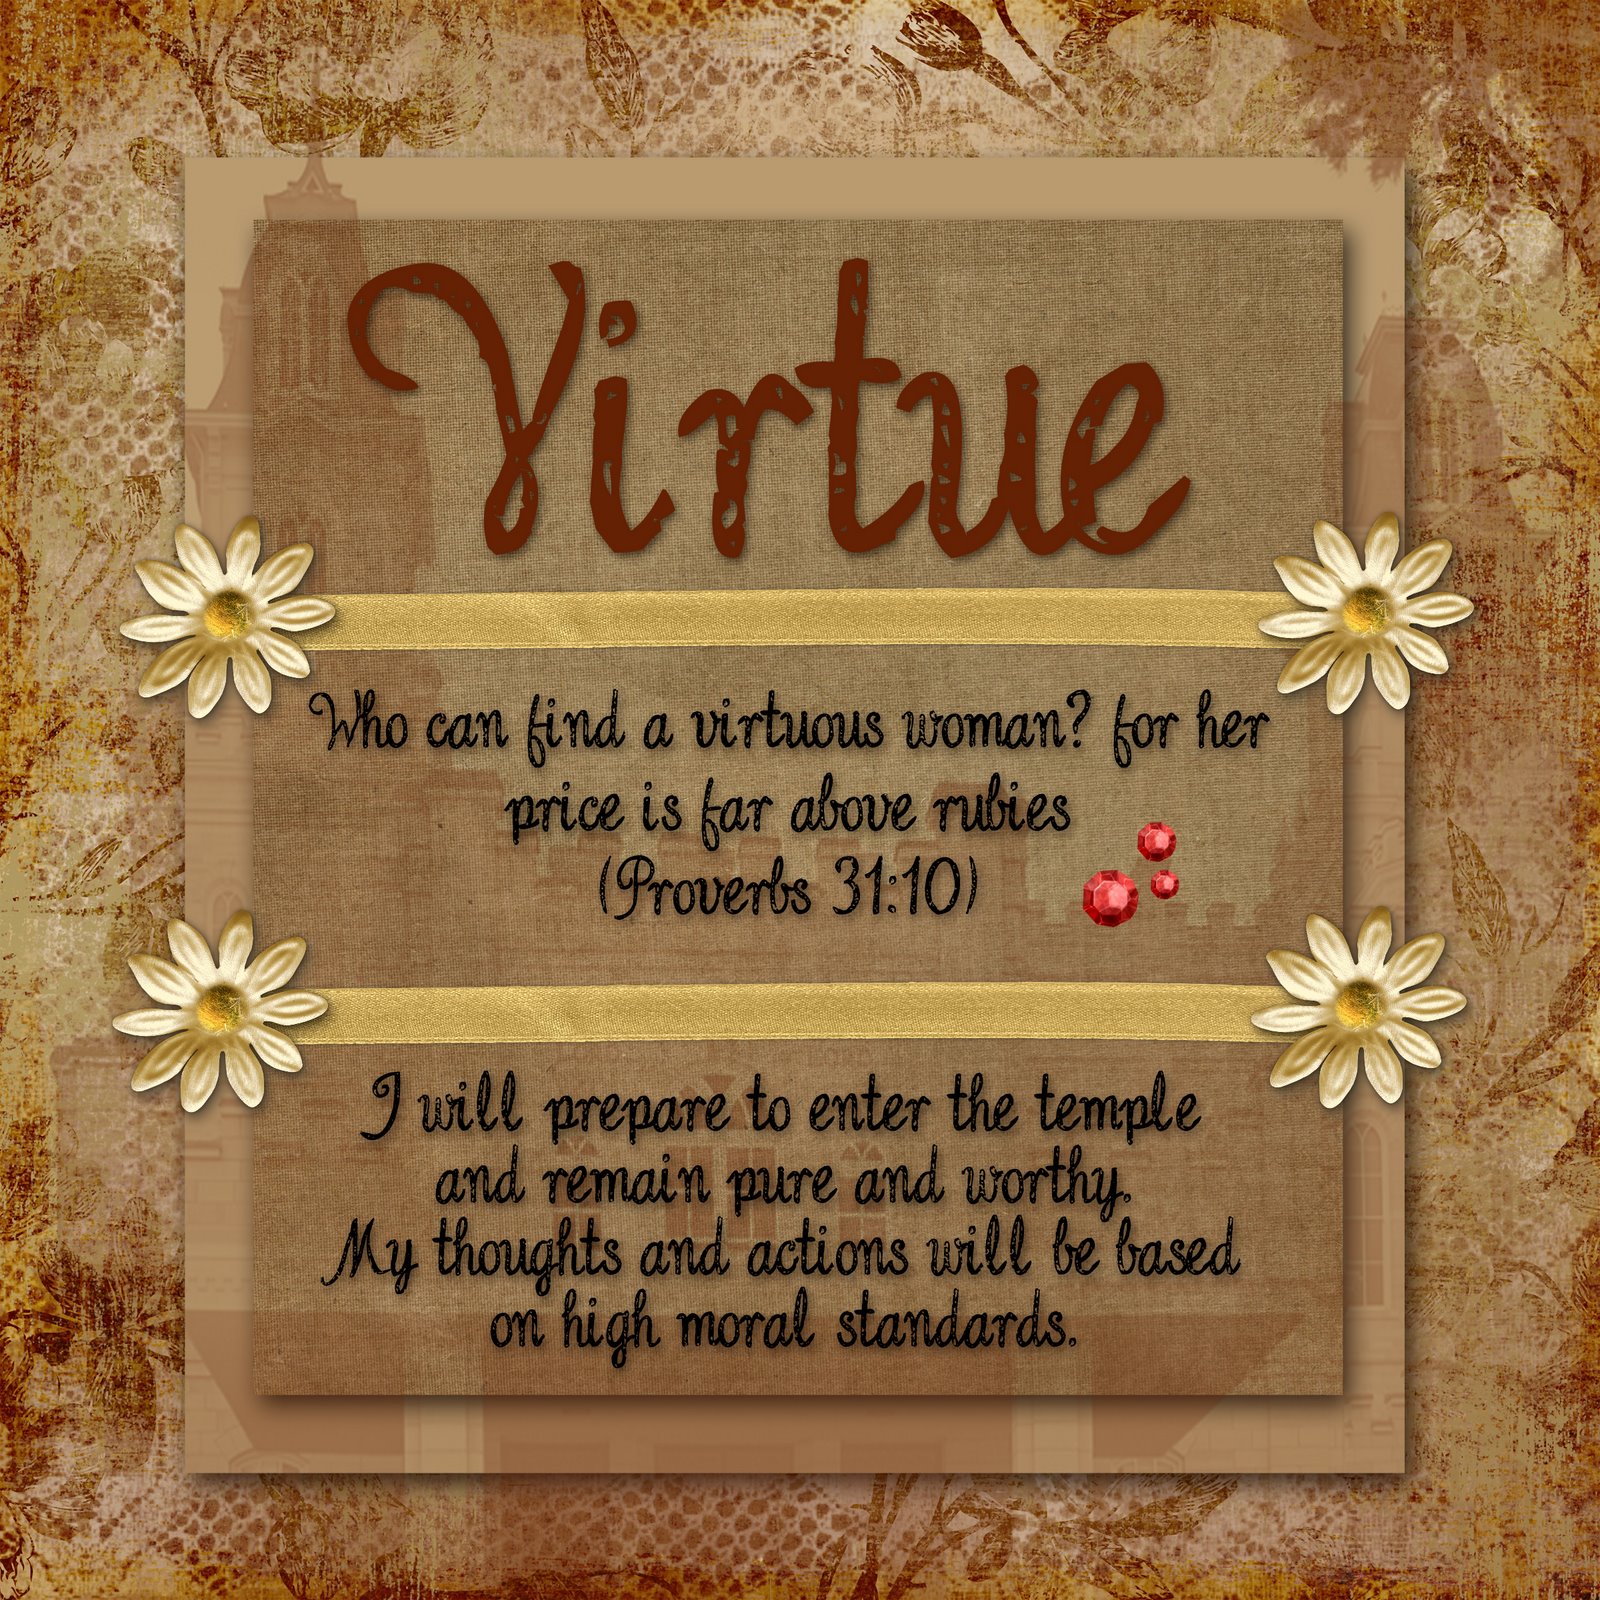 virtue images